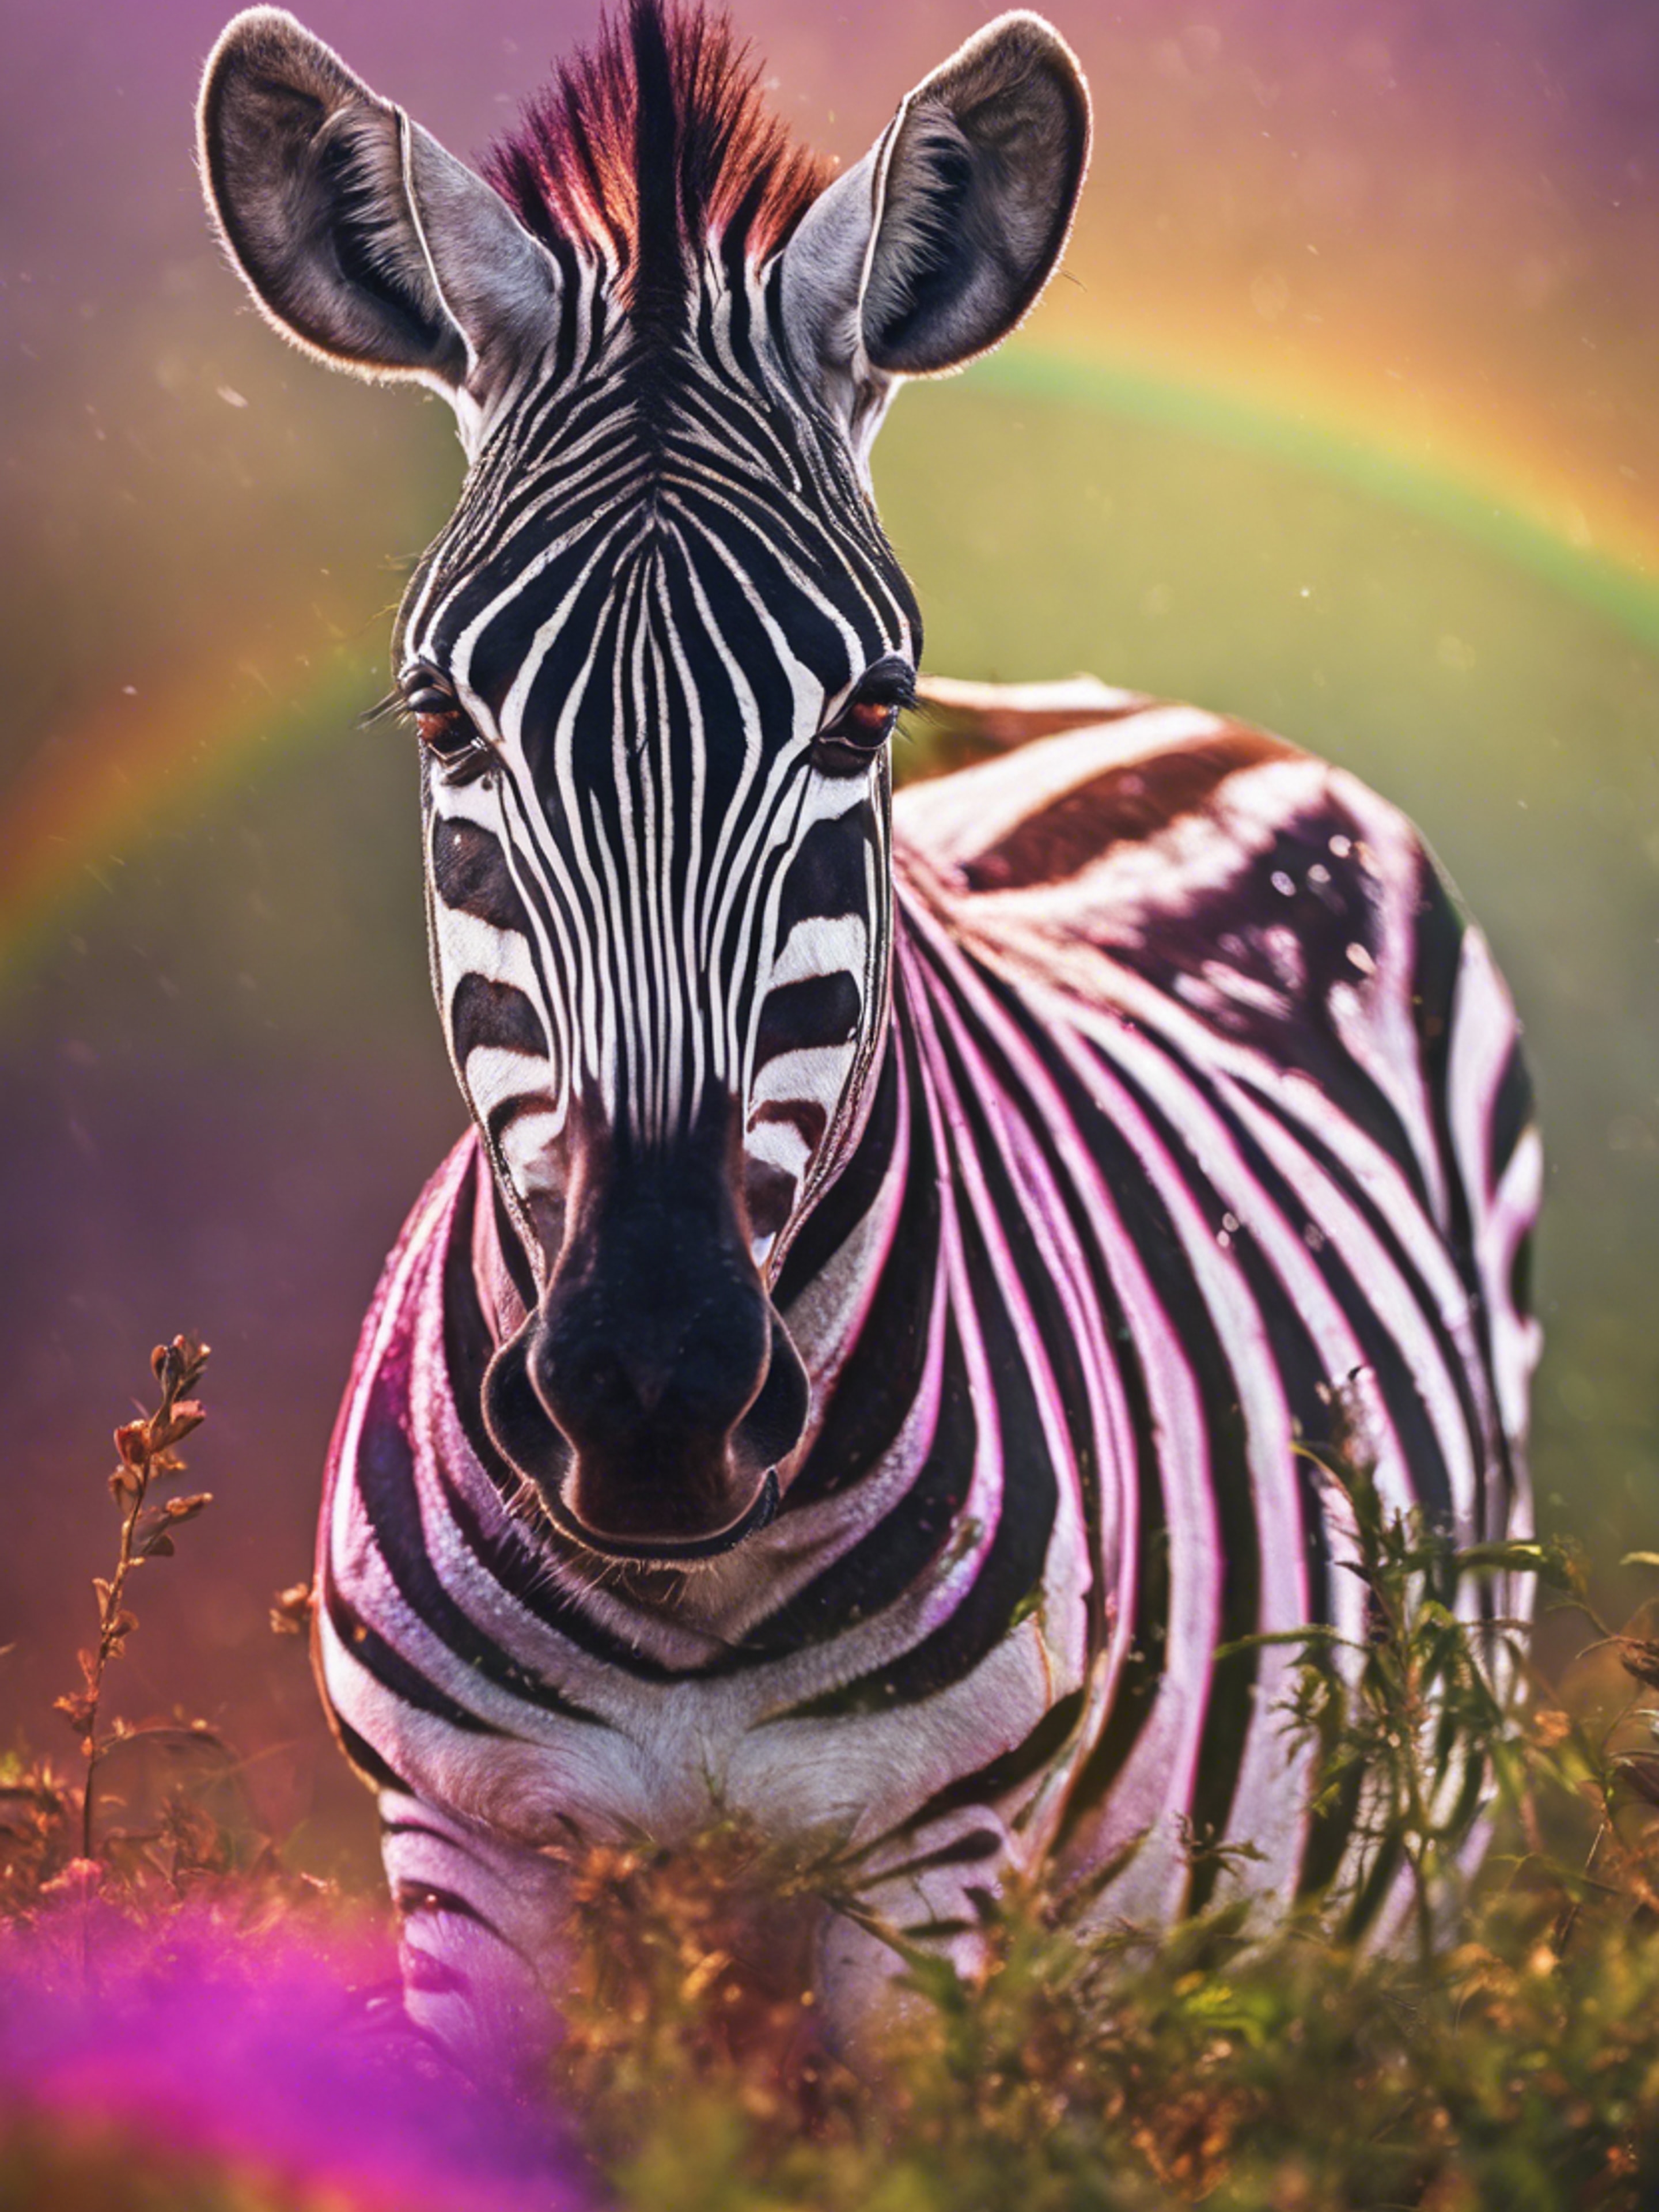 A zebra in the African wild under a vibrant rainbow after a short rain shower. Tapet[a984eacdffd5482bb541]